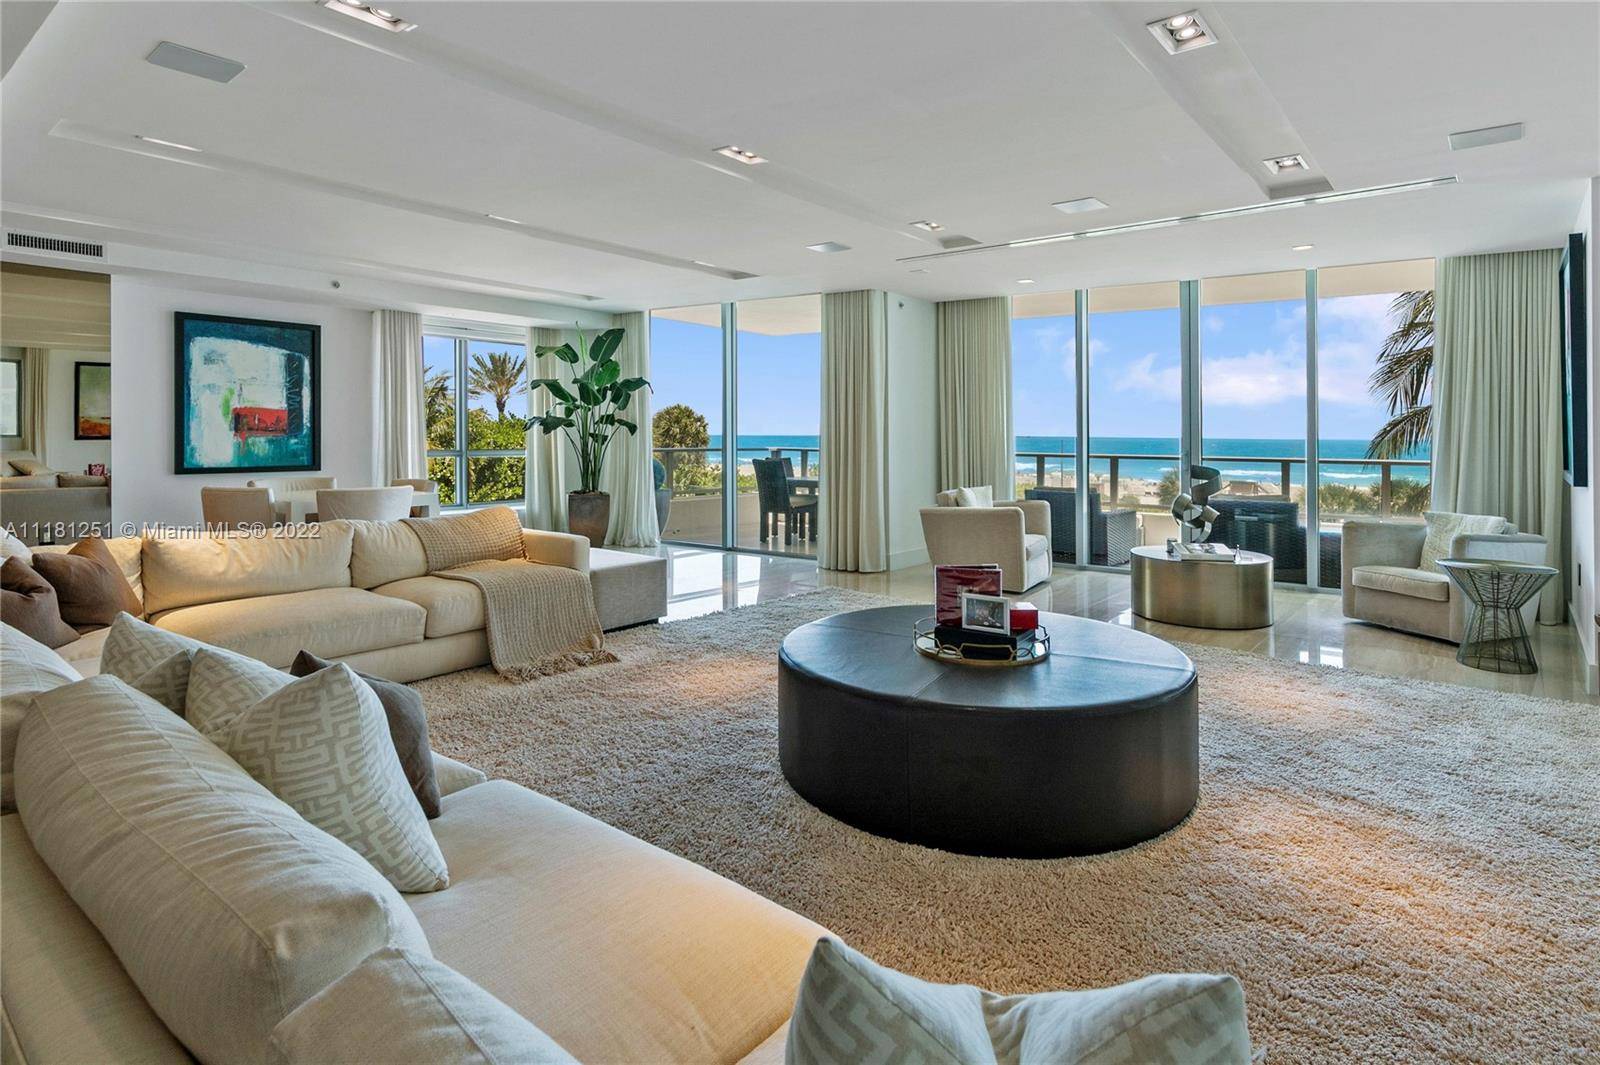 Ocean front 4 bedroom 4. 5 bath residence in Miami Beach's South of Fifth.